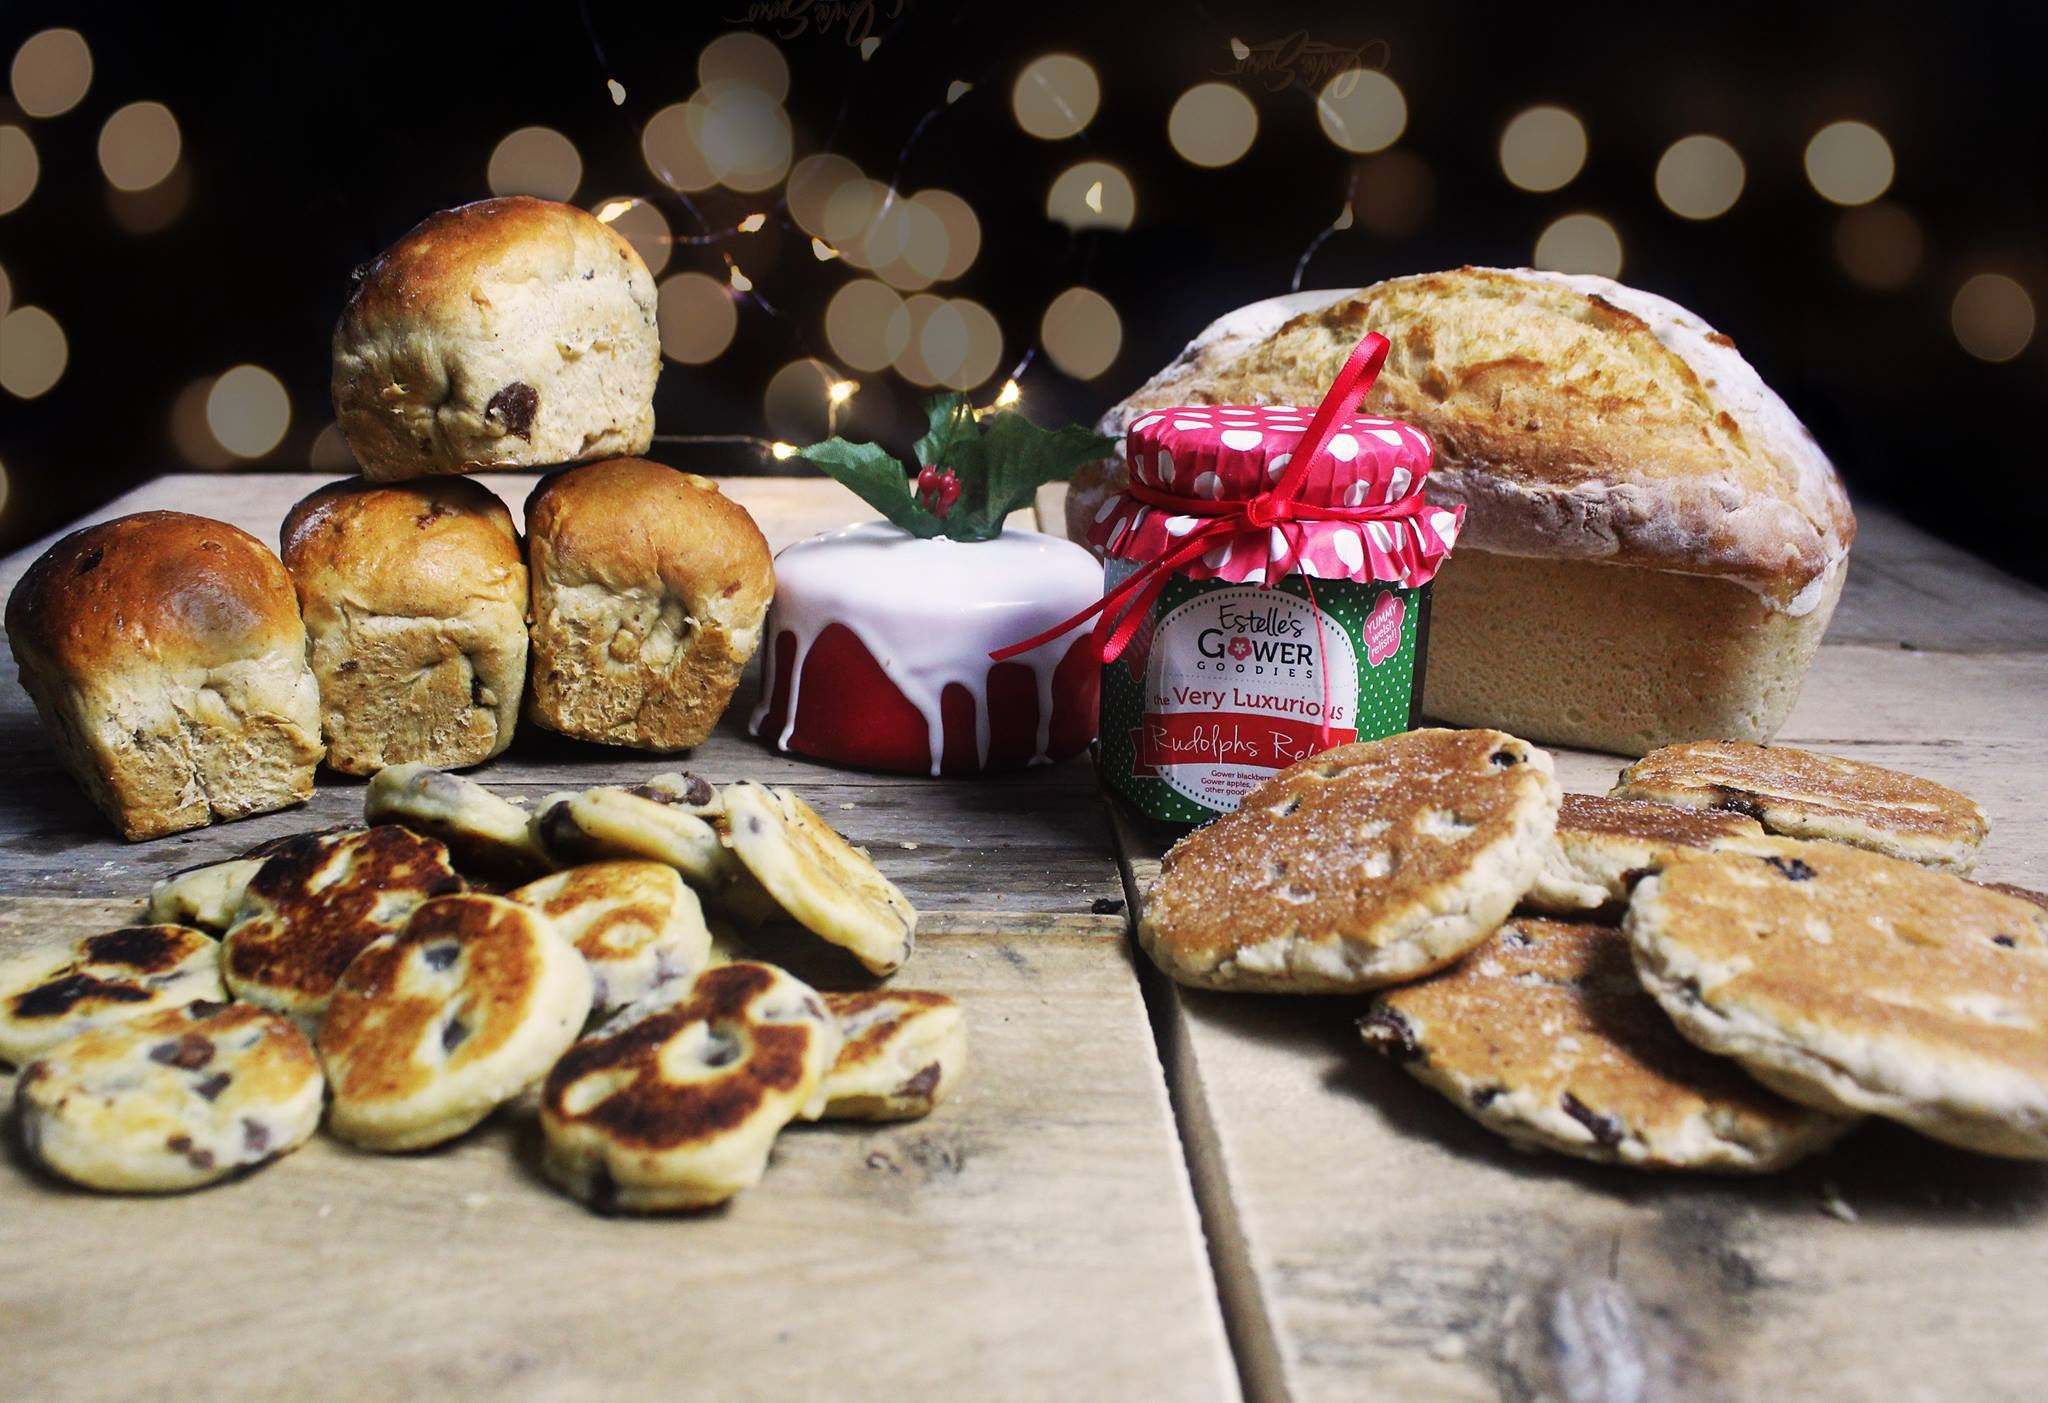 Enjoy a Welsh taste this year with our Christmas food hamper